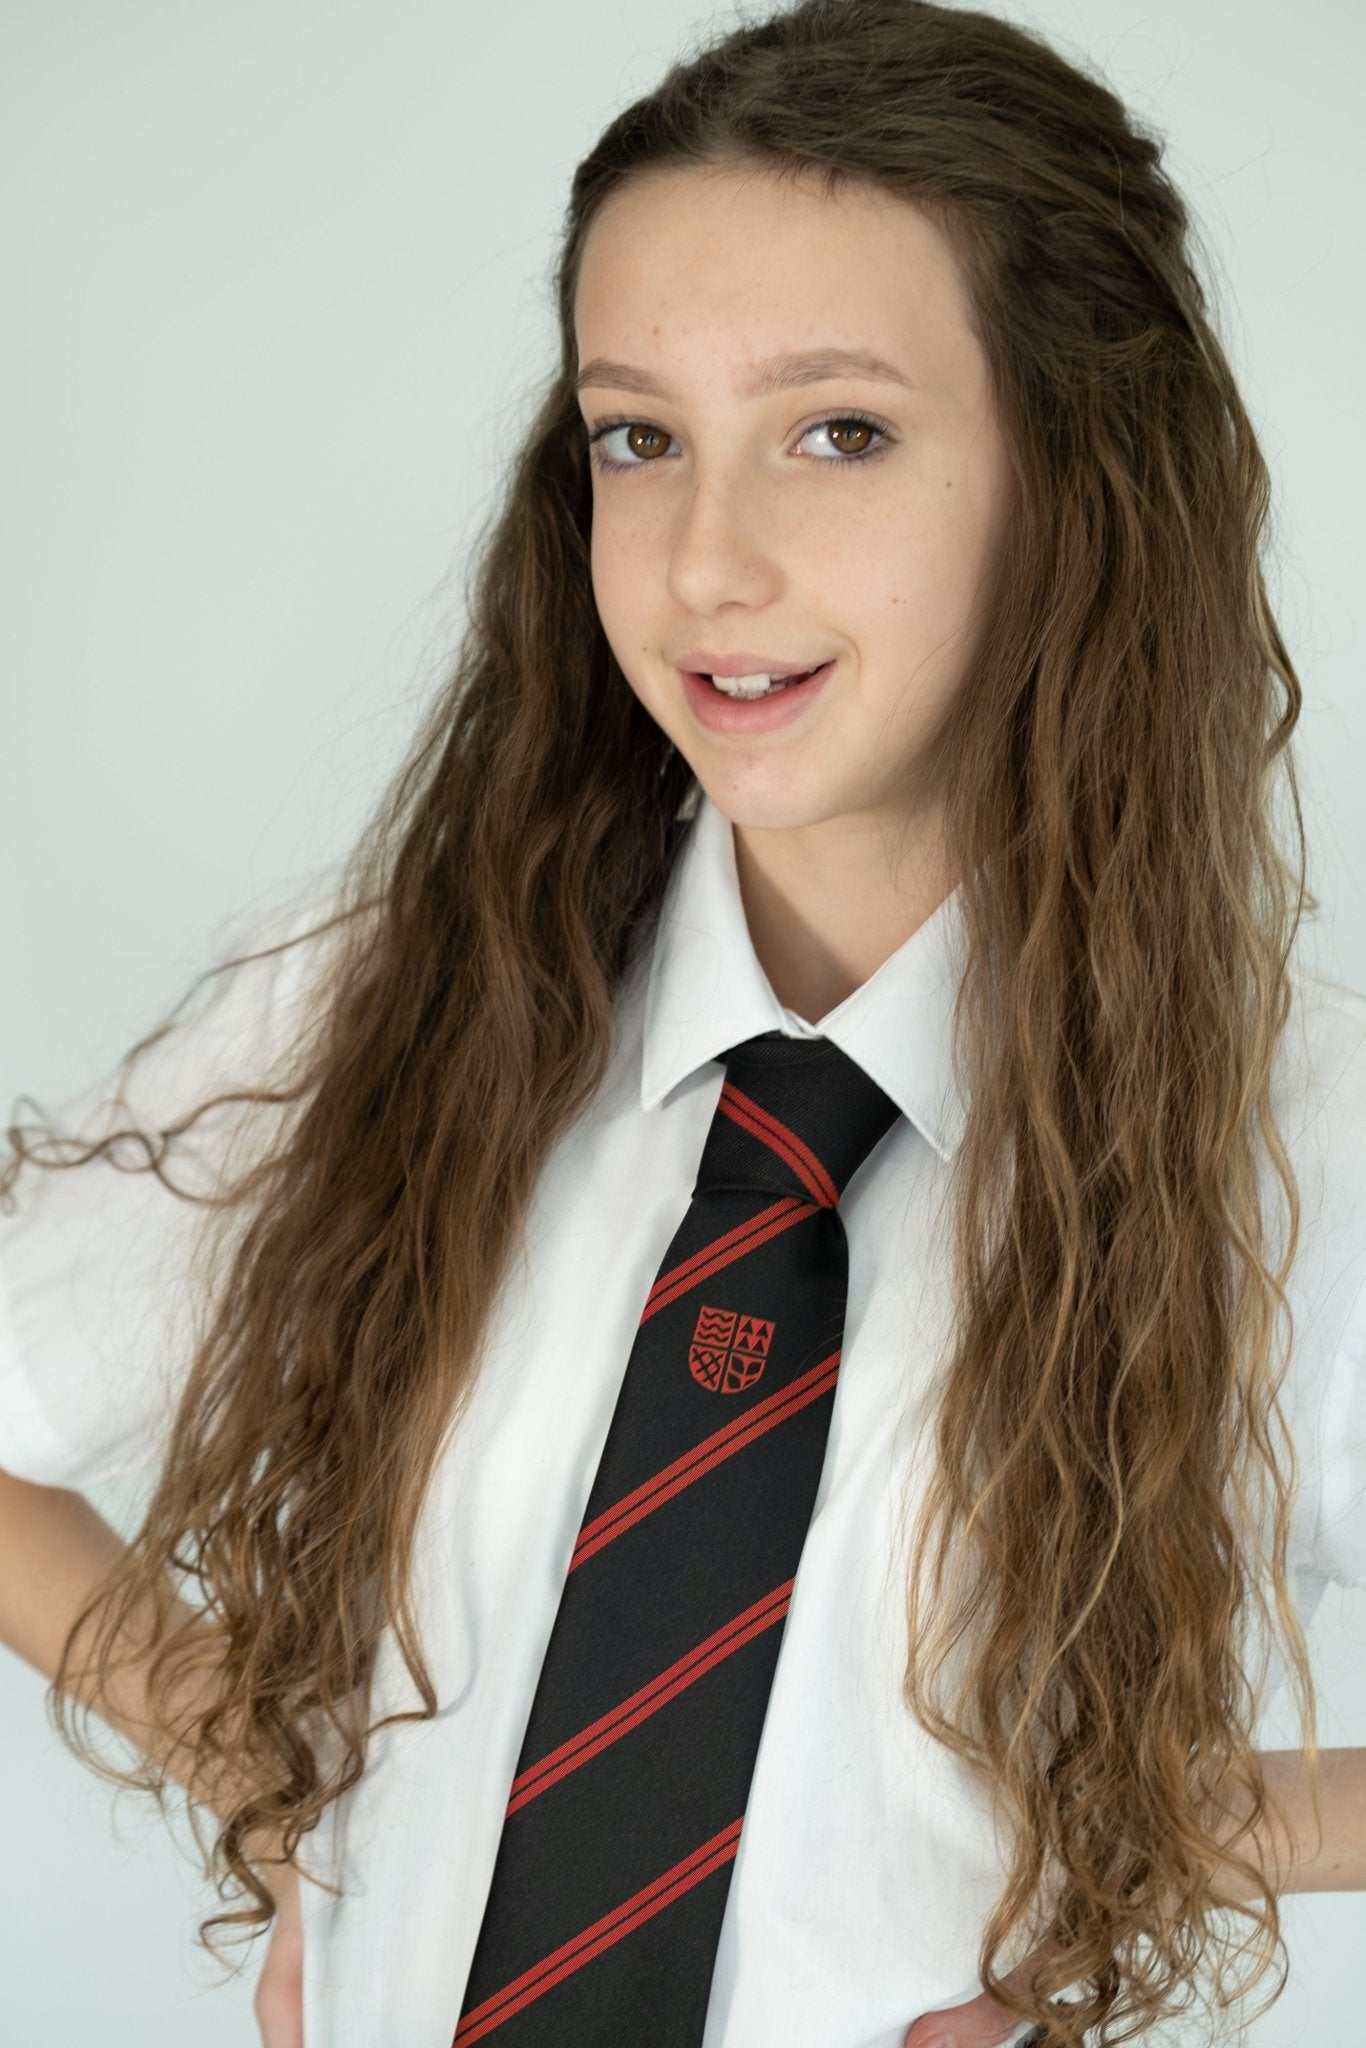 Thames park Tie - red house - Uniformwise Schoolwear